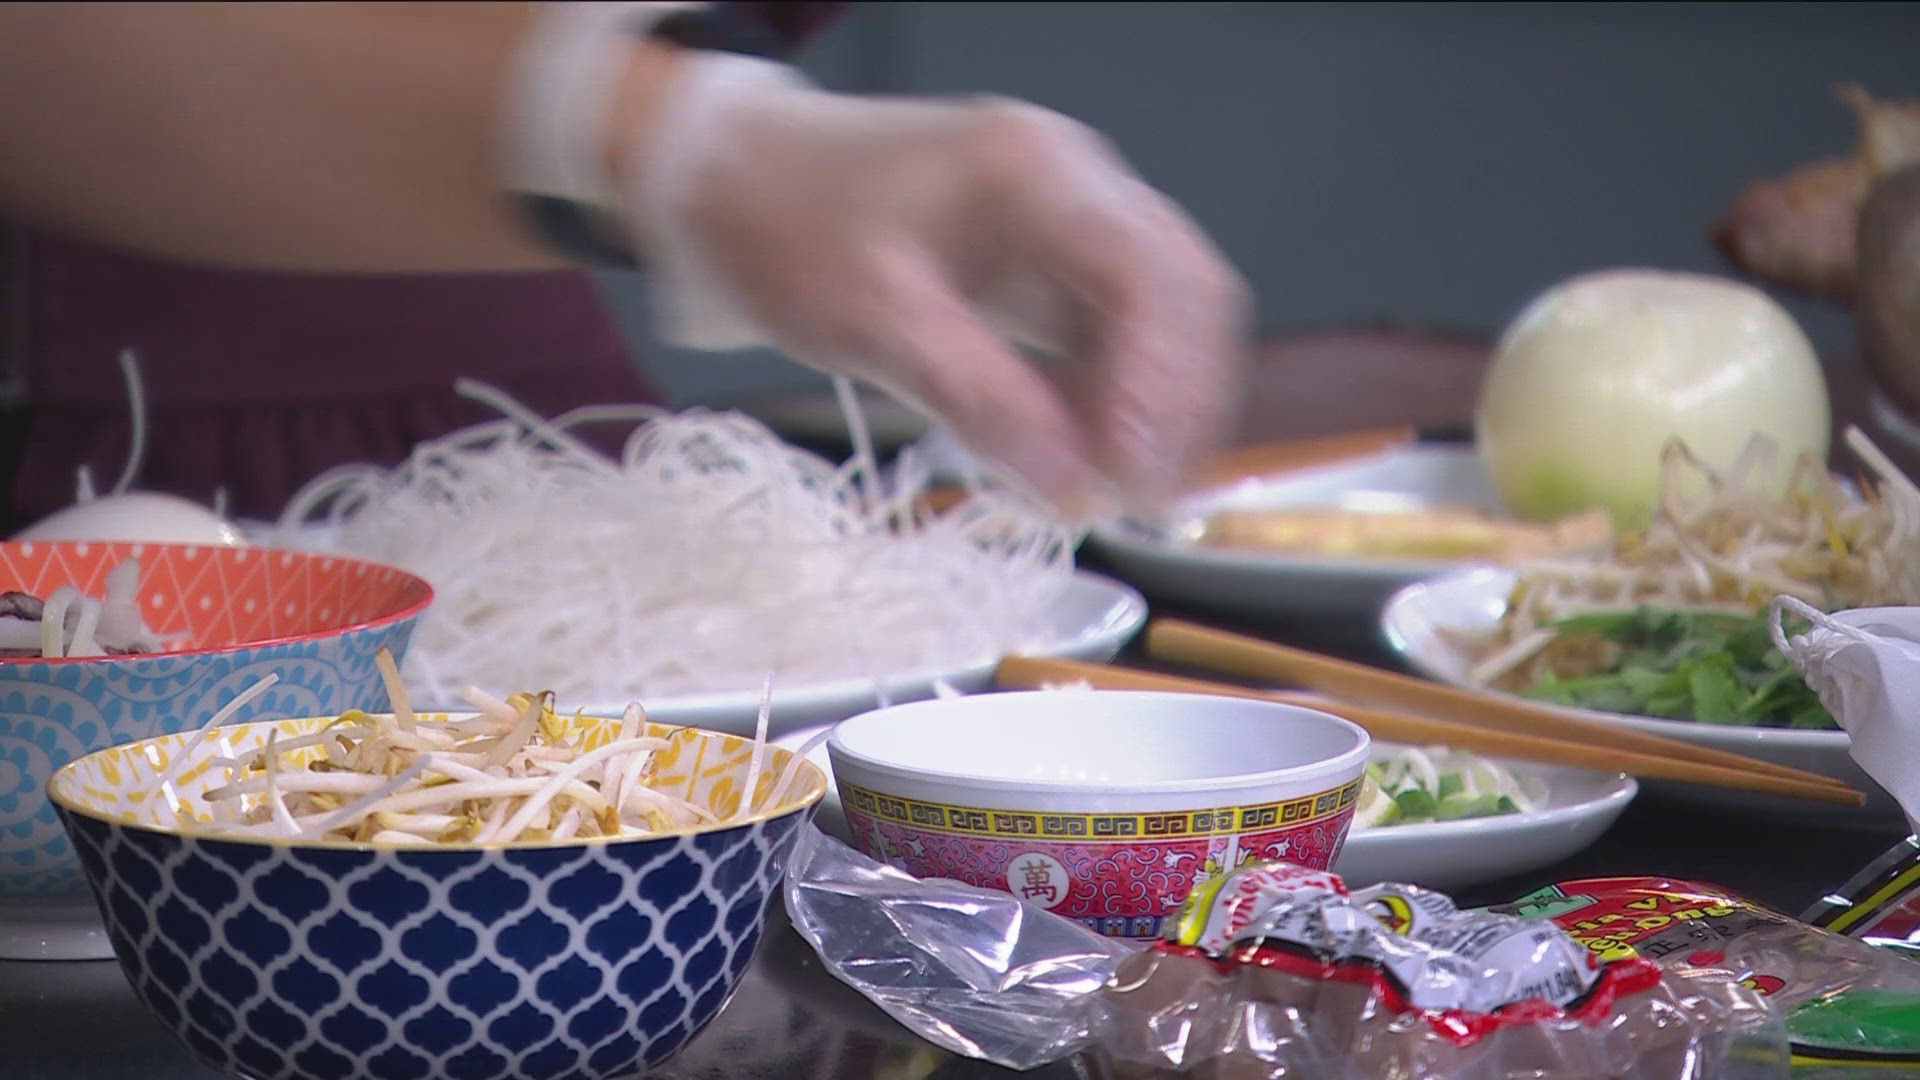 Trung Pham, the owner of Pham's Rice Bowl in Minneapolis, said the recipe has been passed down his family.